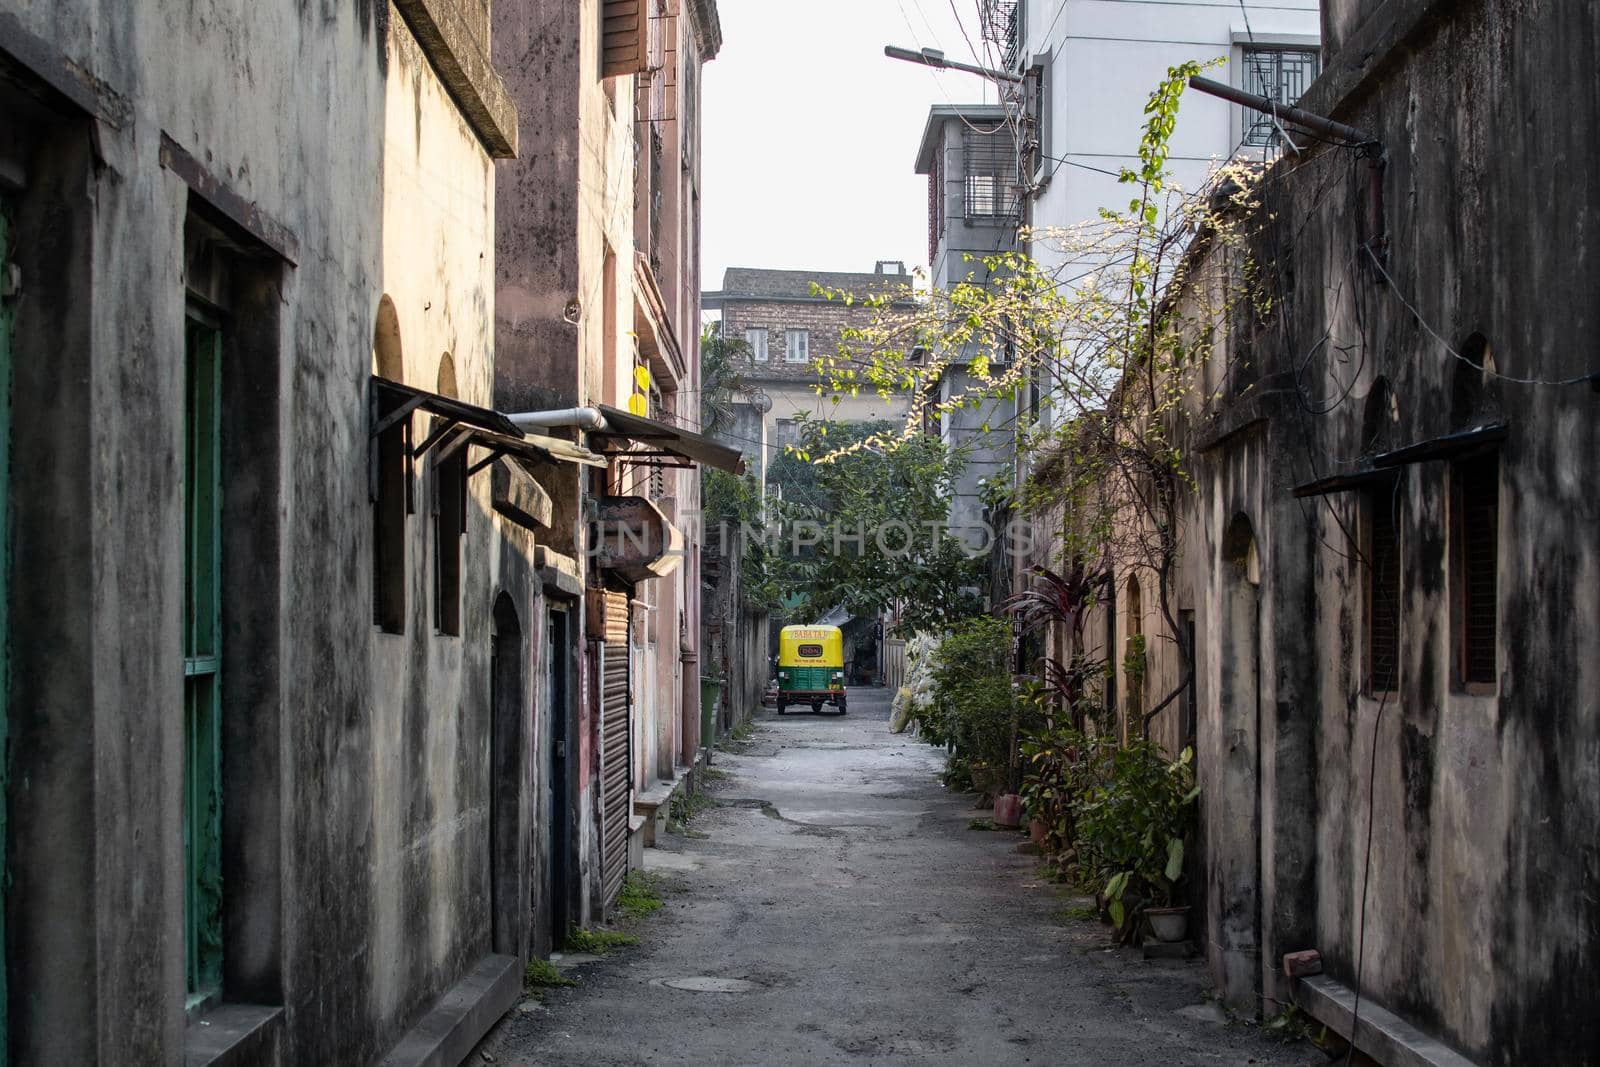 Kolkata, India - February 1, 2020: A yellow and green cng tuk tuk is parked in an alley in between recitential buildings on December 1, 2020 in Kolkata, India